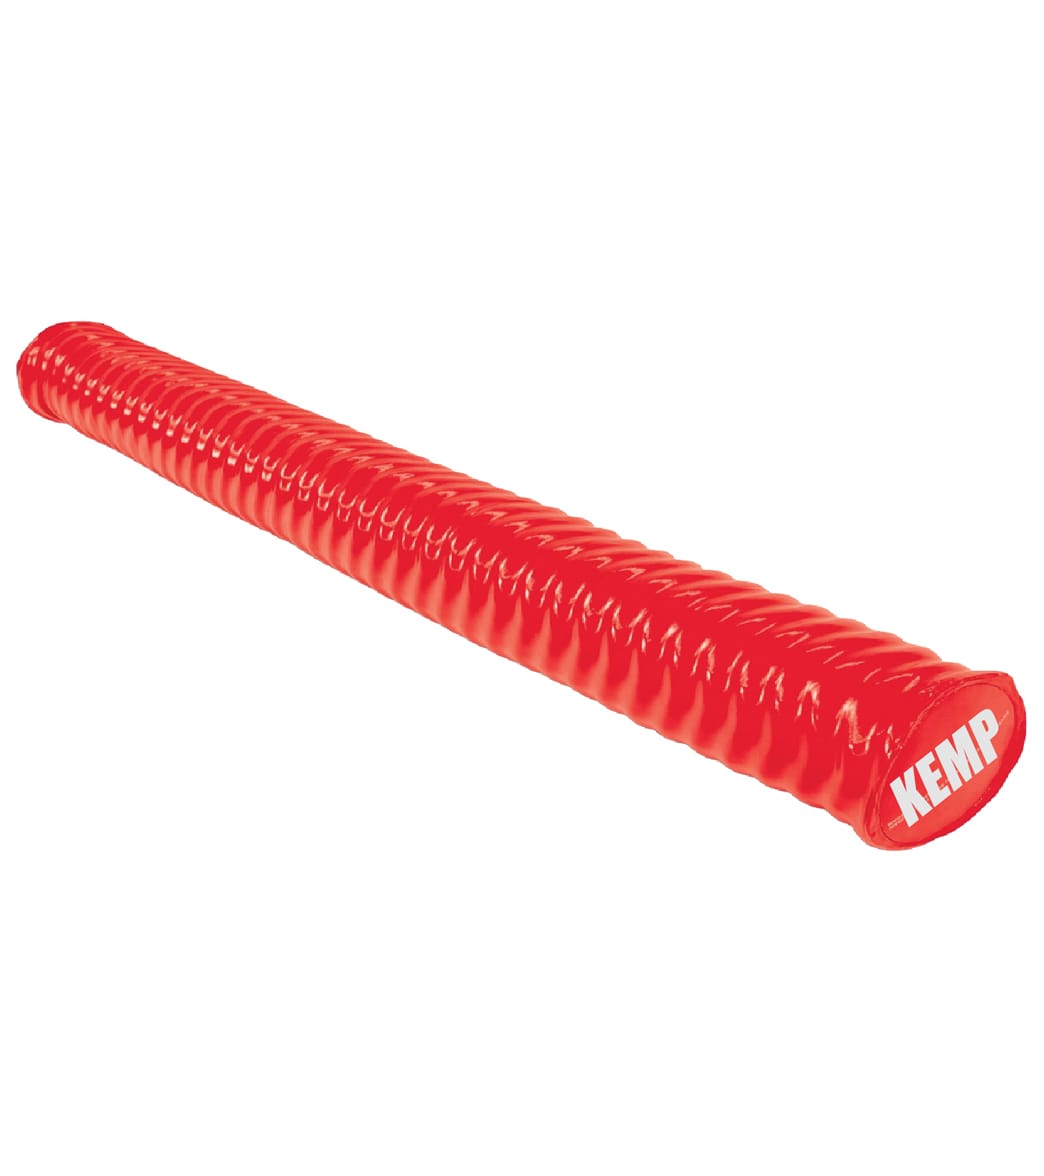 Kemp 3.5' Ribbed Soft Foam Pool Noodle - Red - Swimoutlet.com